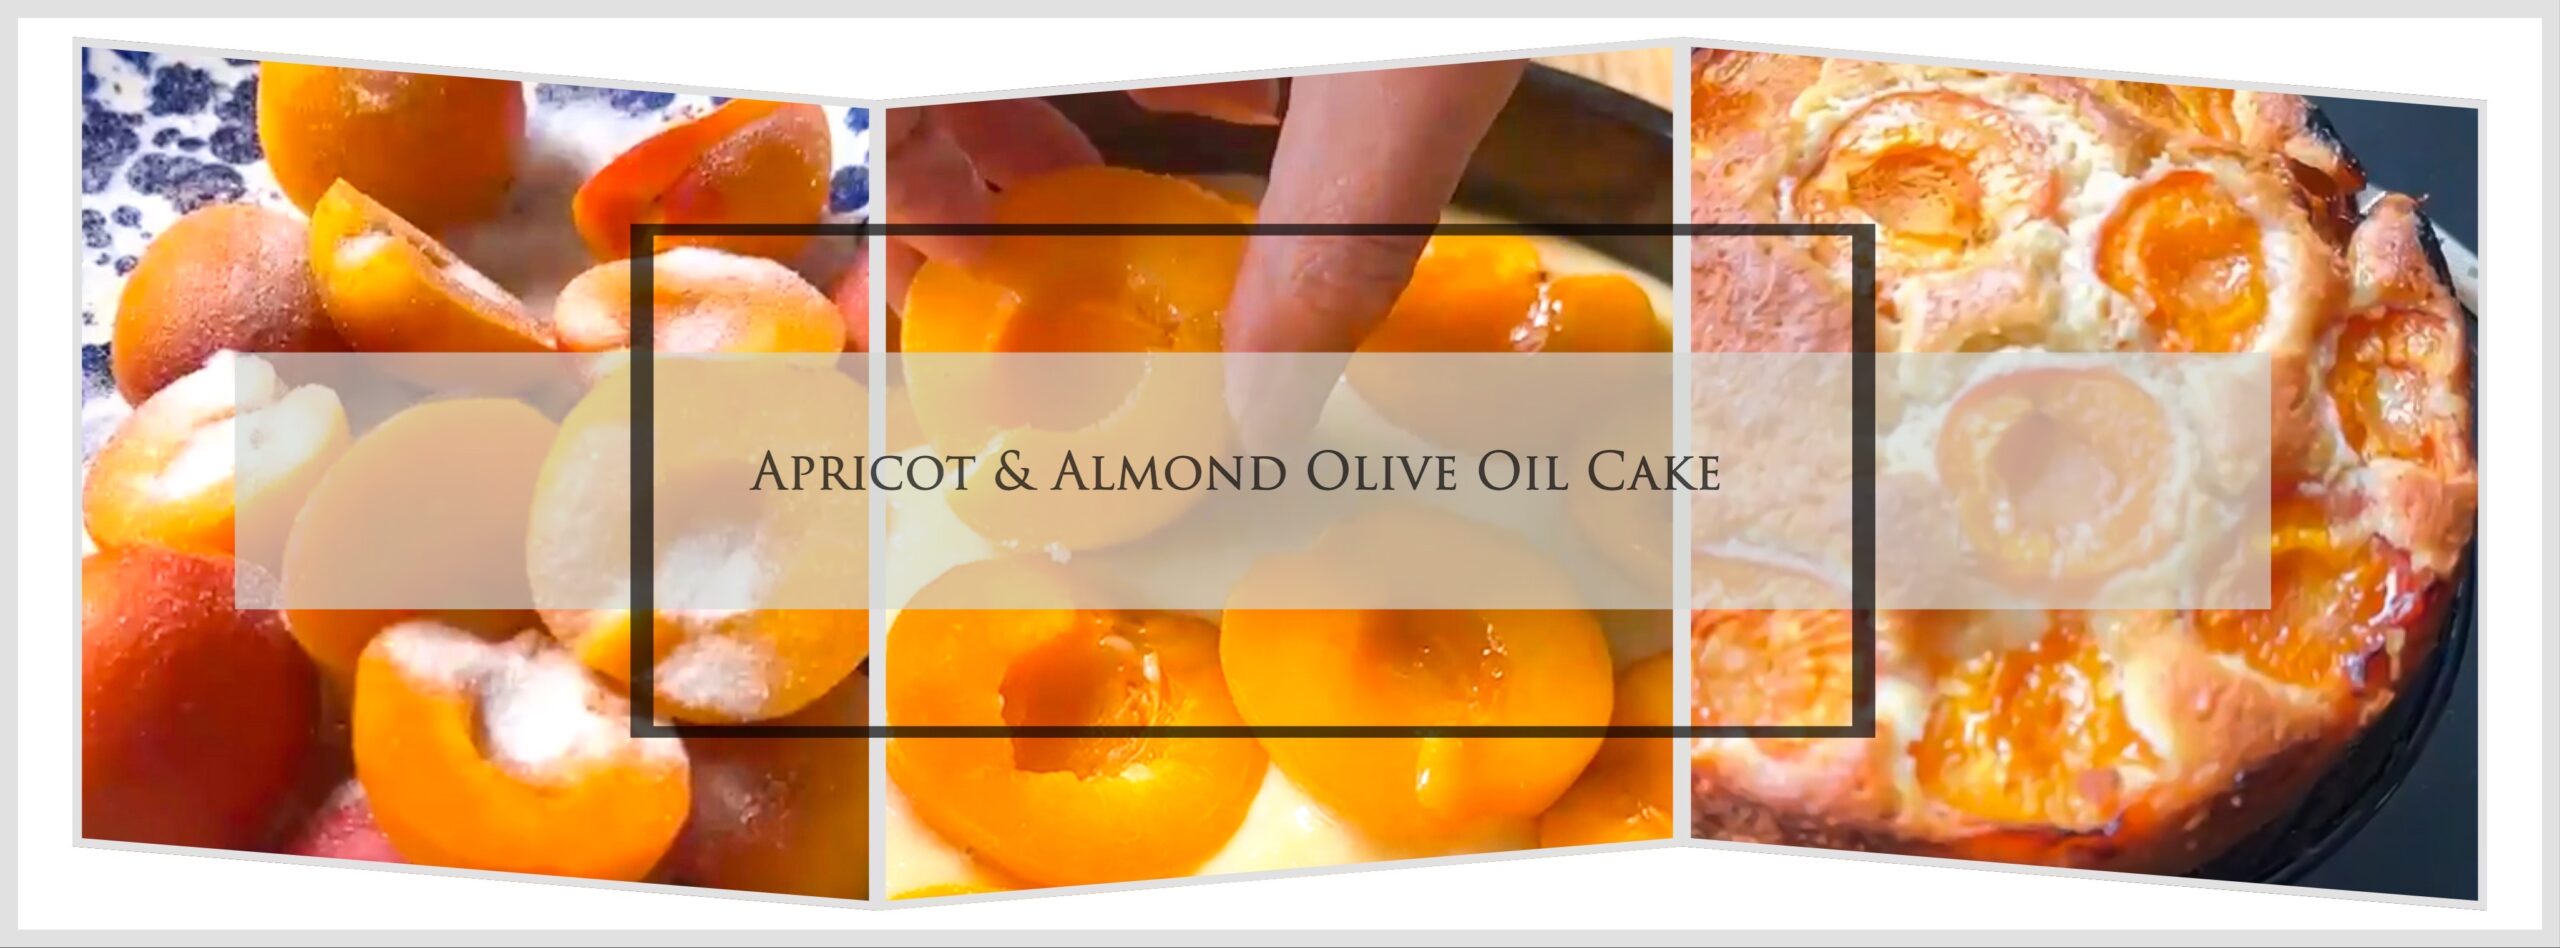 Apricot and Almond Olive Oil Cake